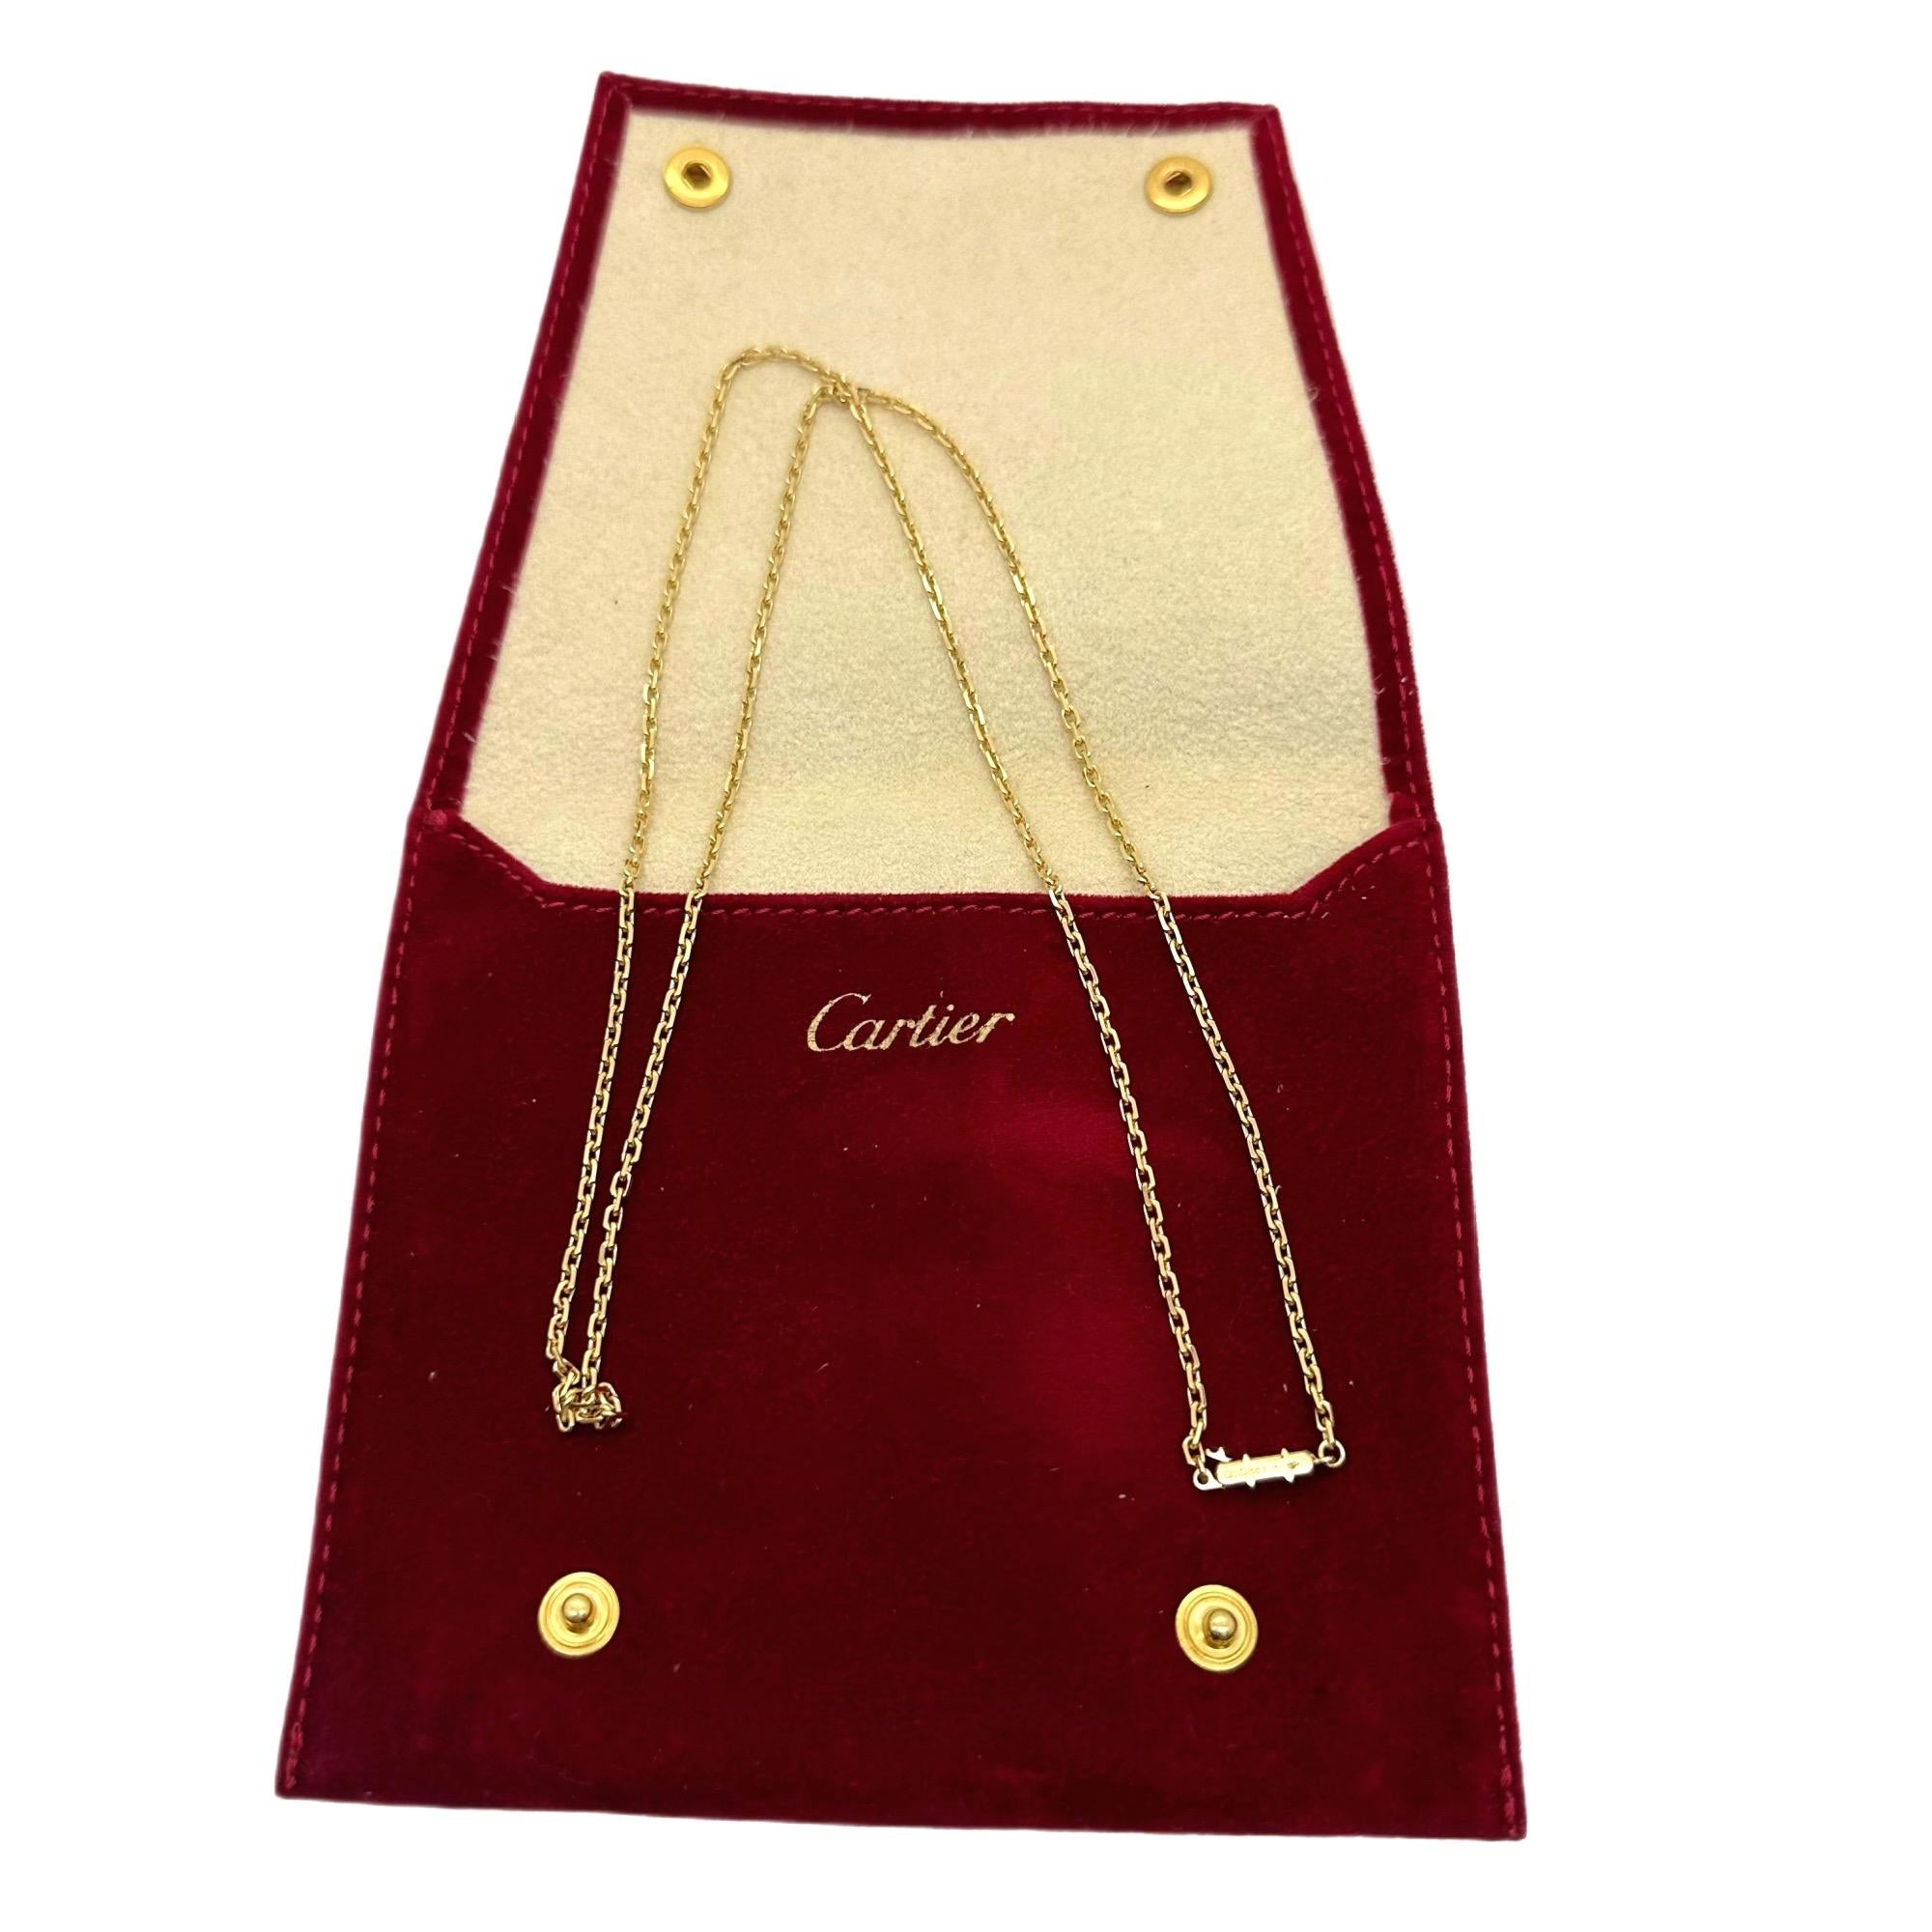 Cartier Chain Necklace
Style:  Chain
Ref. number:  QSD***
Metal:  18kt  Rose Gold
Size / Measurements:  24' Inches
Hallmark:  ©Cartier Au750 QSD*** on push lock
Includes:  Cartier Red Velvet Jewelry Pouch
Sku#OFC-R5800

